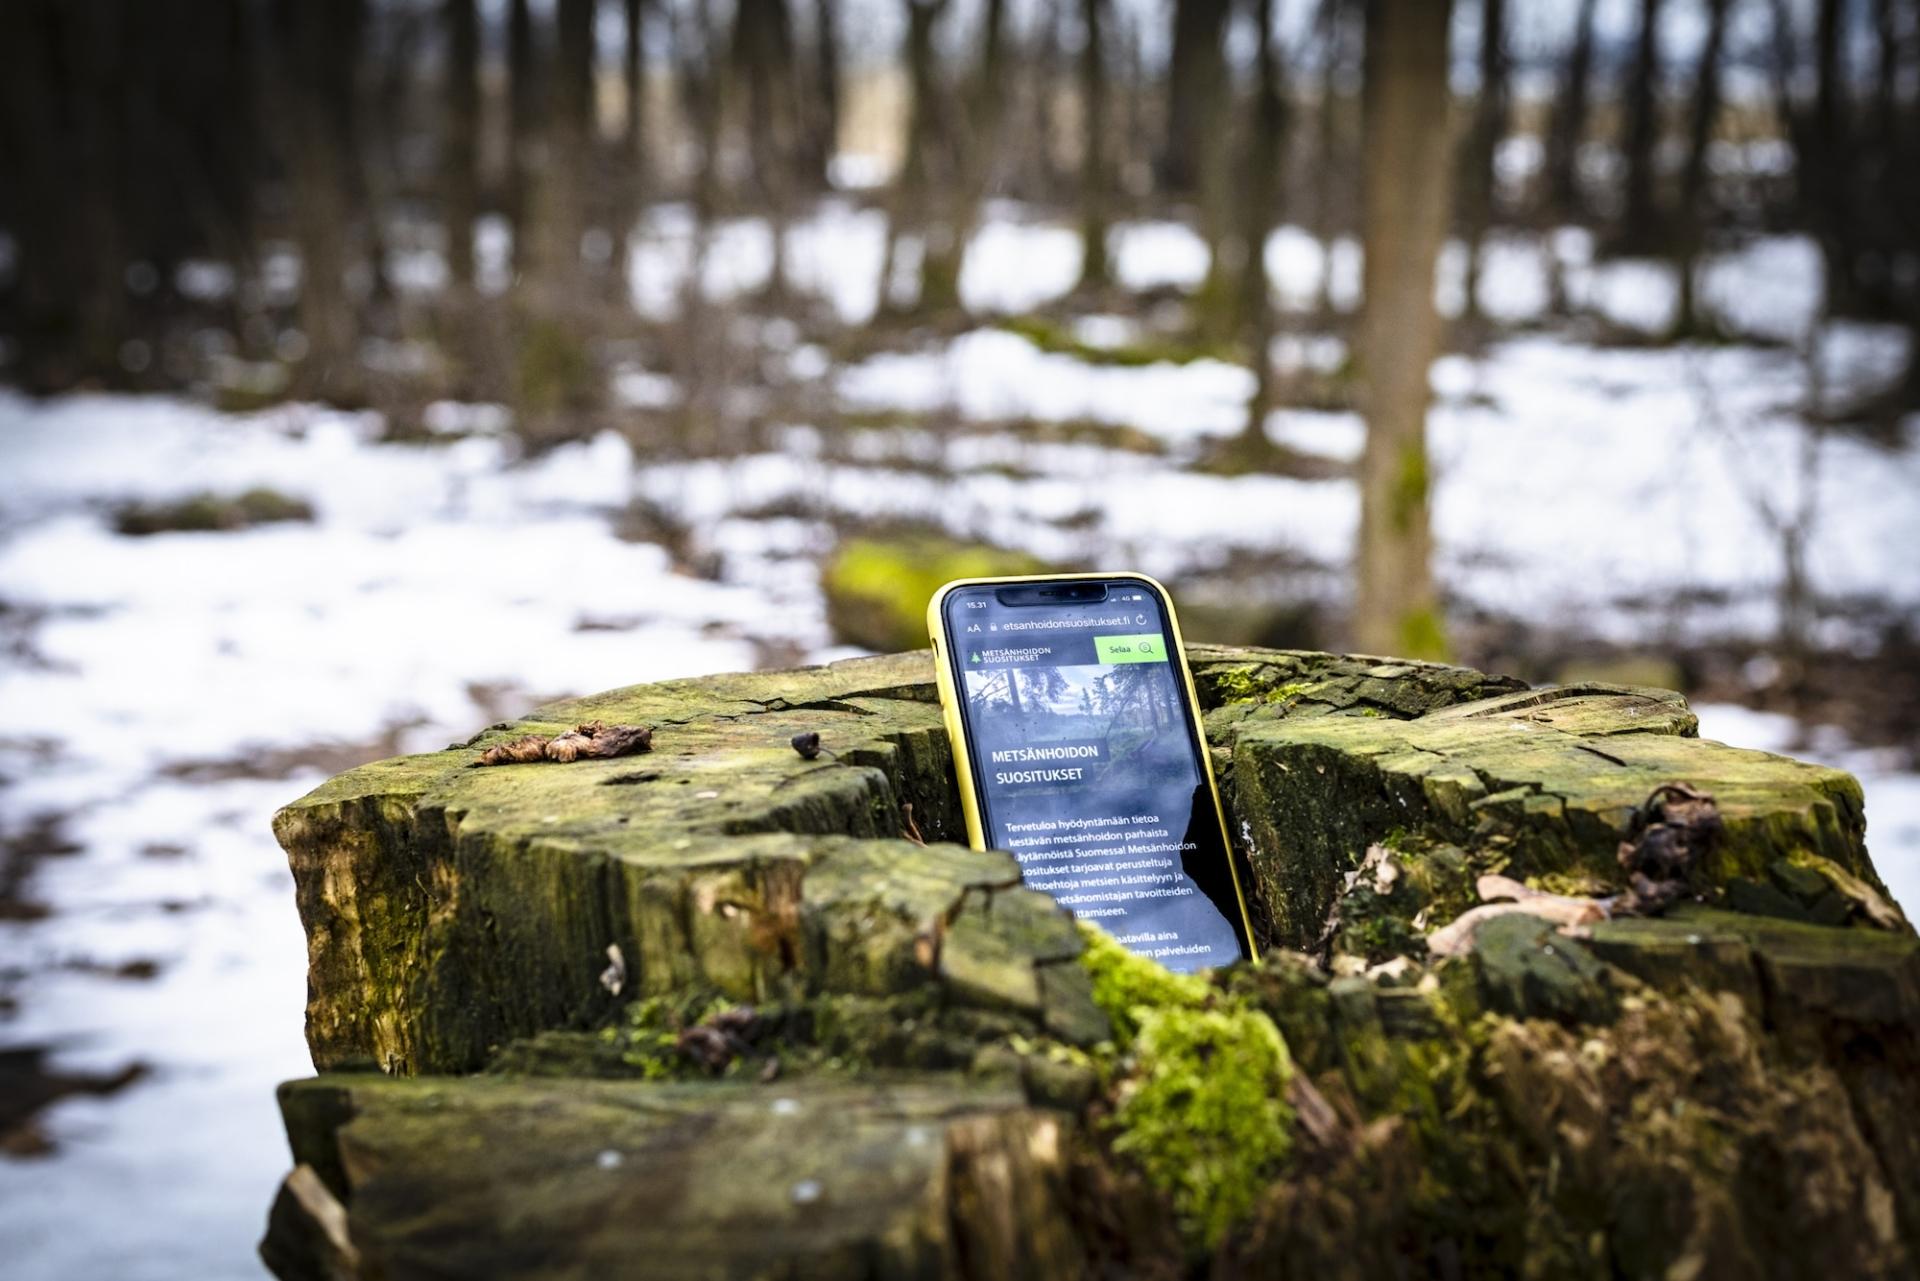 The phone is on a tree stump in the winter forest